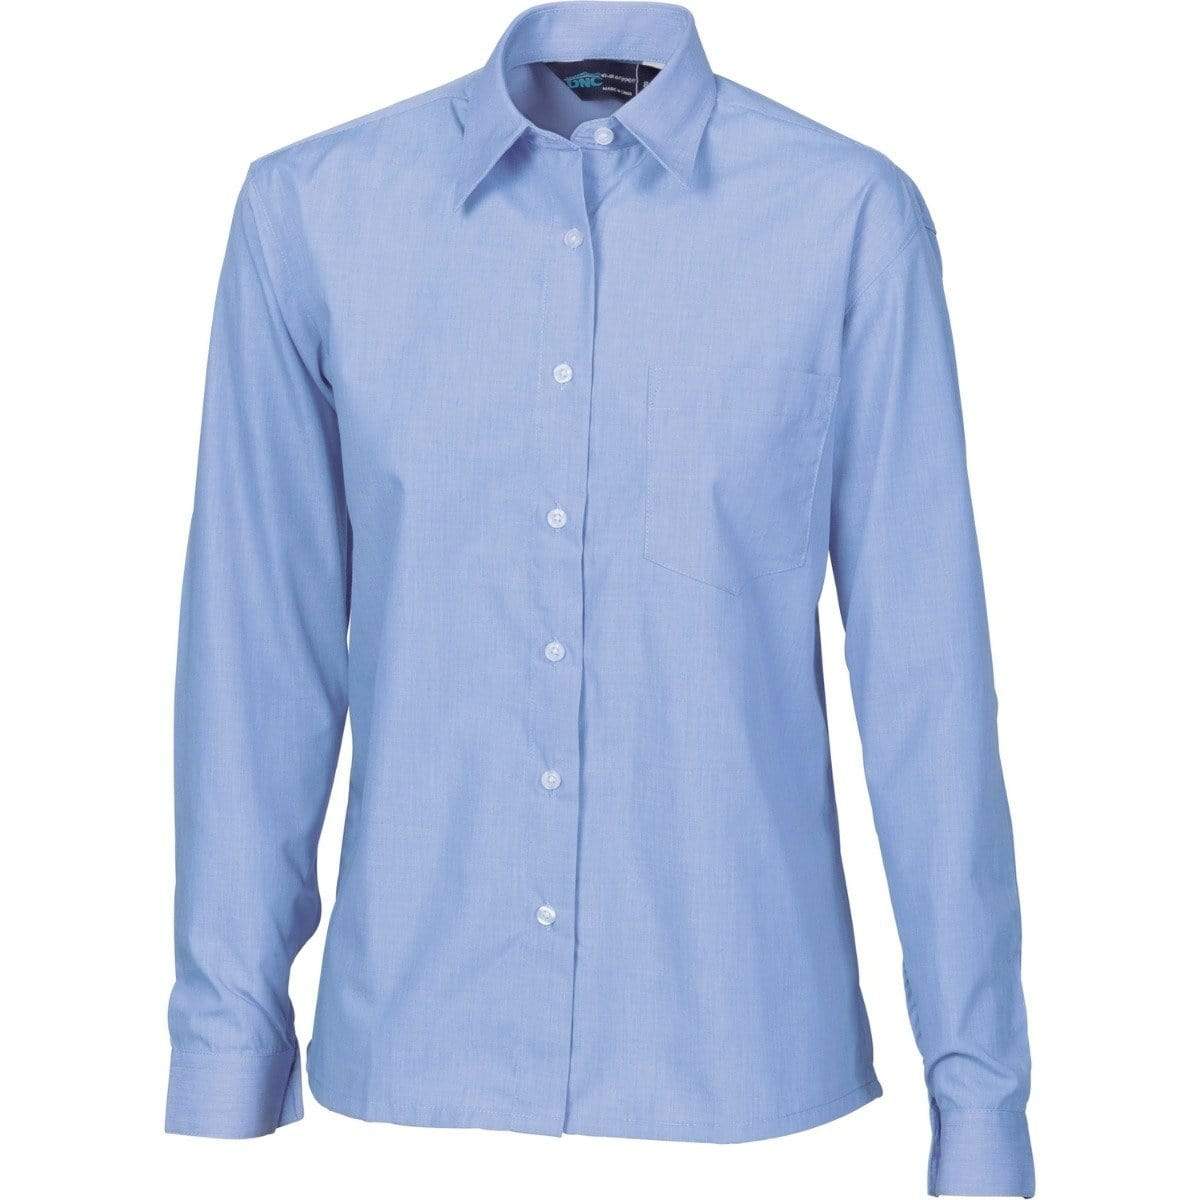 Dnc Workwear Polyester Cotton Long Sleeve Business Shirt - 4212 Corporate Wear DNC Workwear Blue Chambray 6 